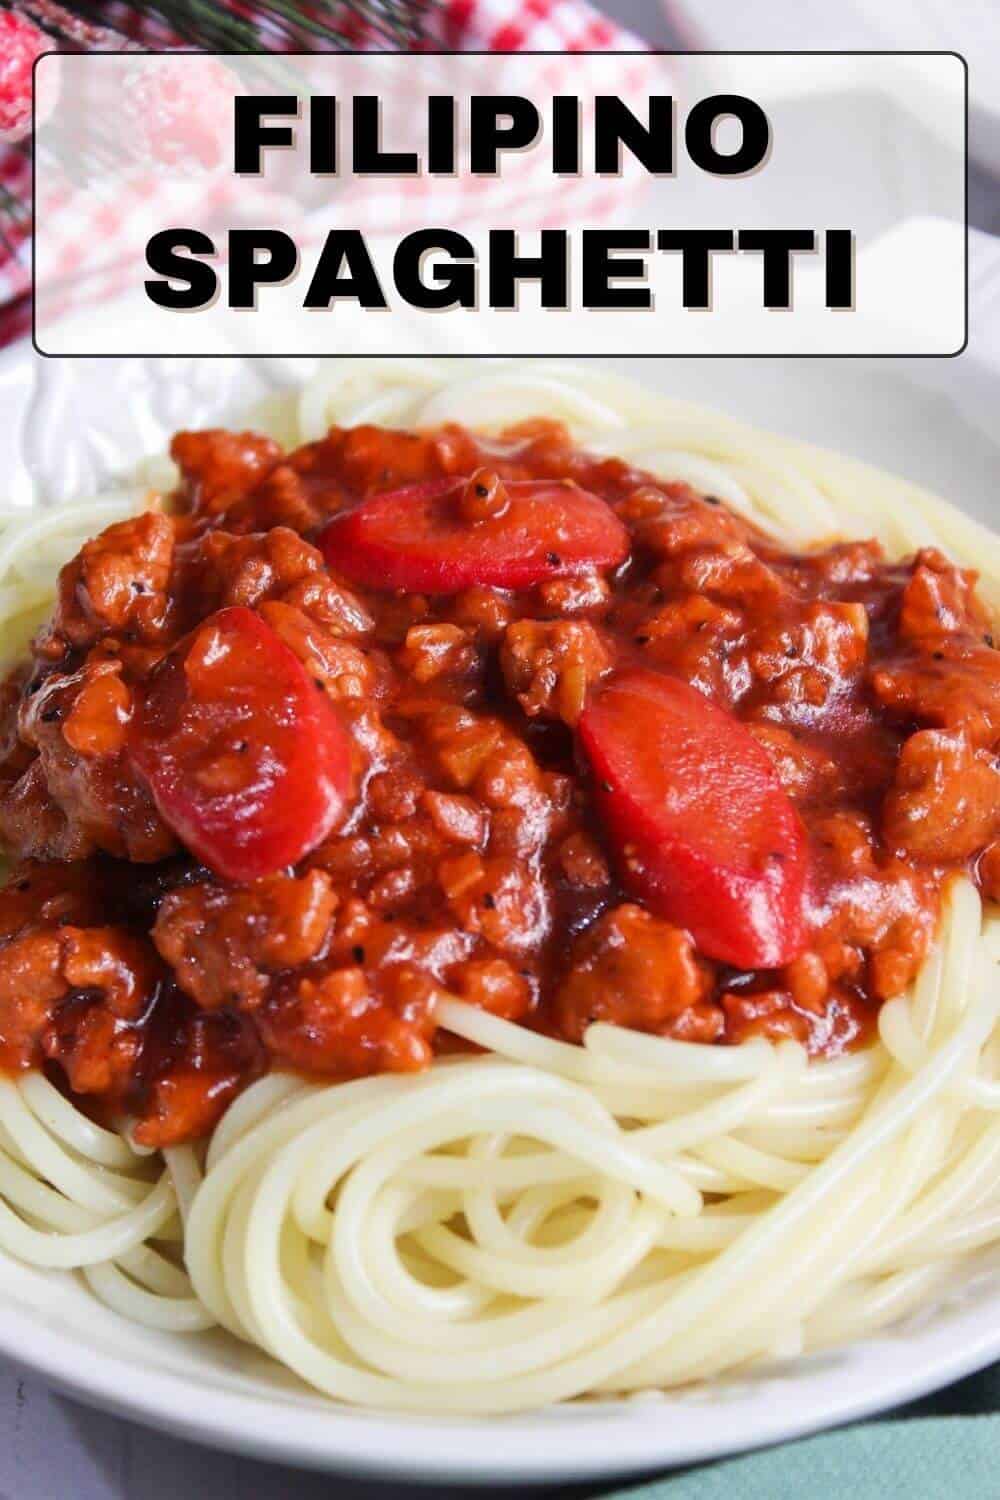 Filipino spaghetti with meat and tomatoes on a plate.